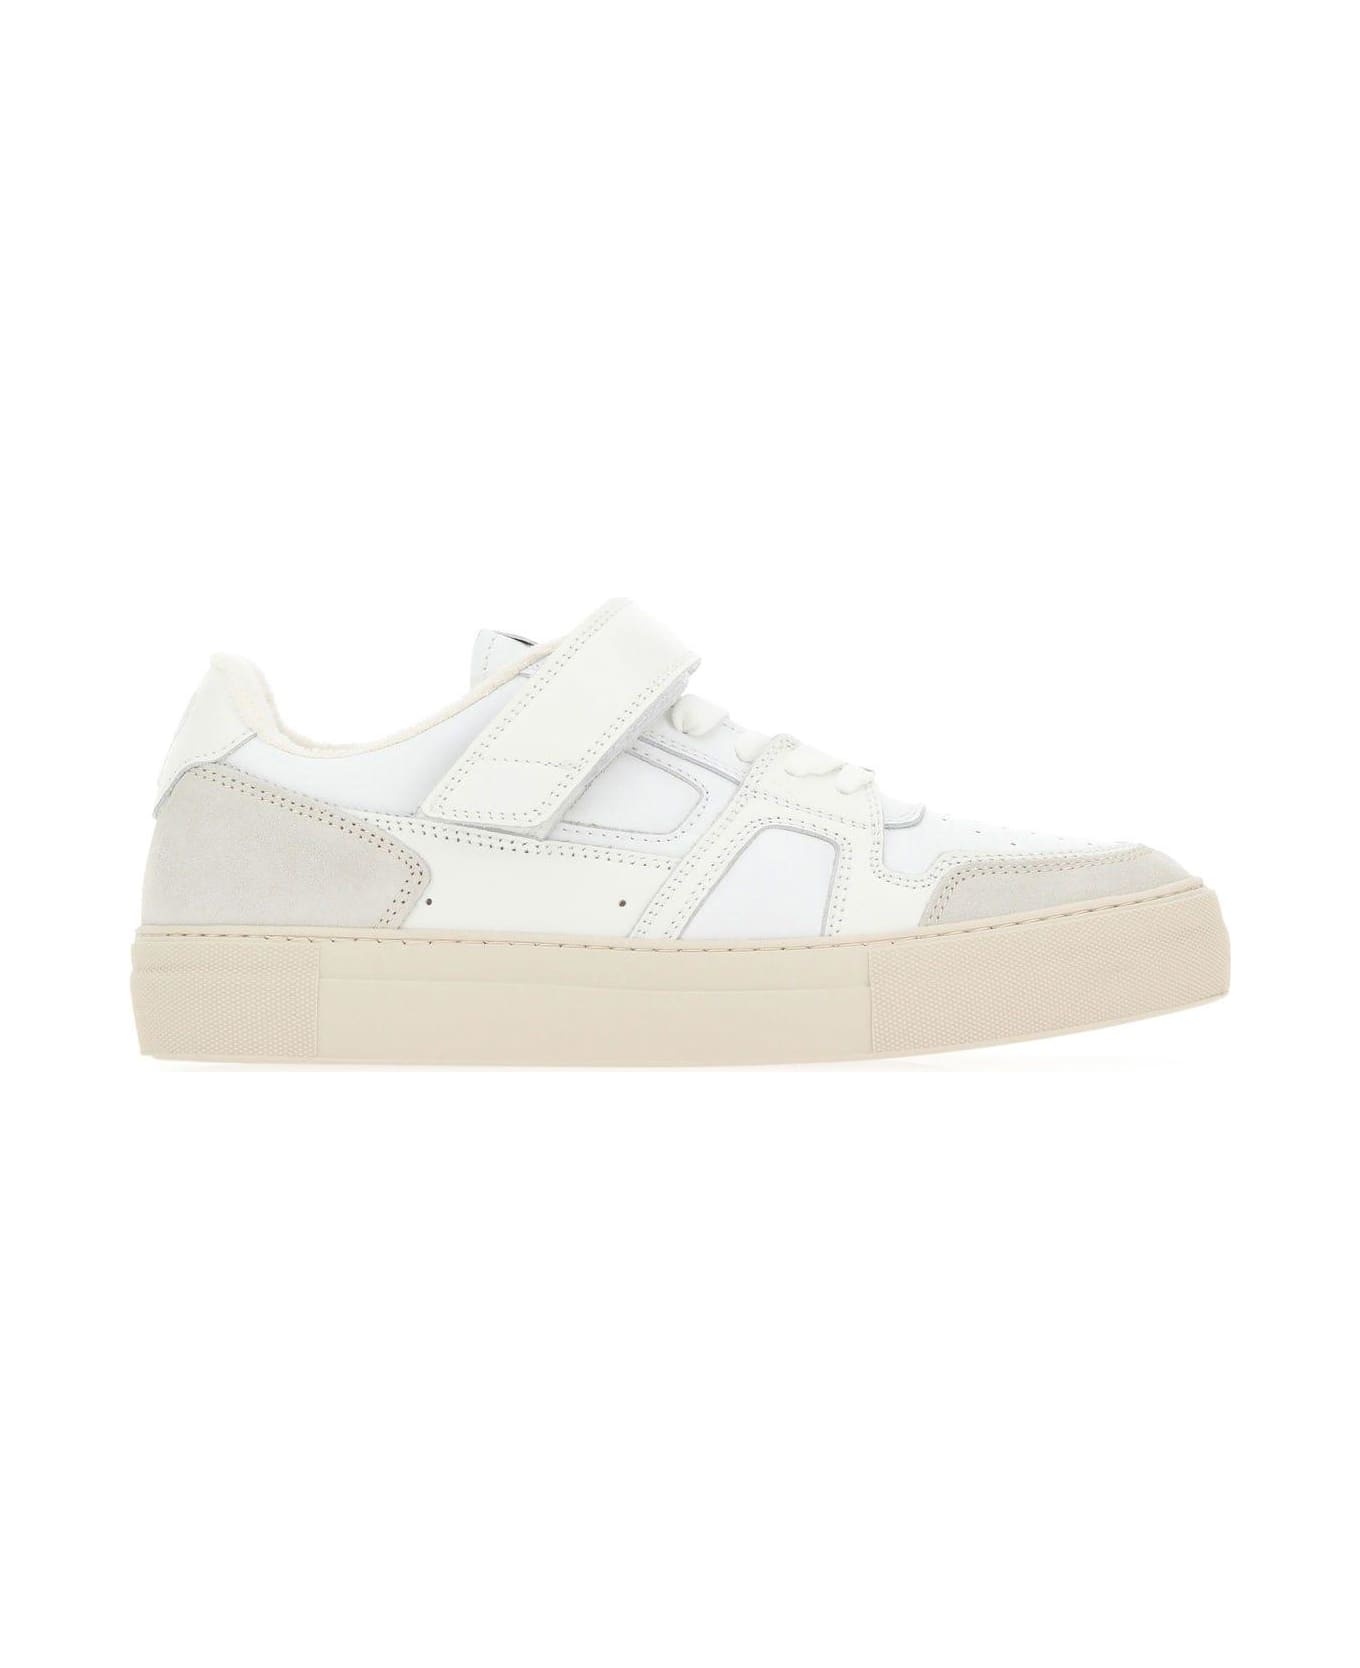 Ami Alexandre Mattiussi Two-tone Leather And Suede Arcade Sneakers - WHITE